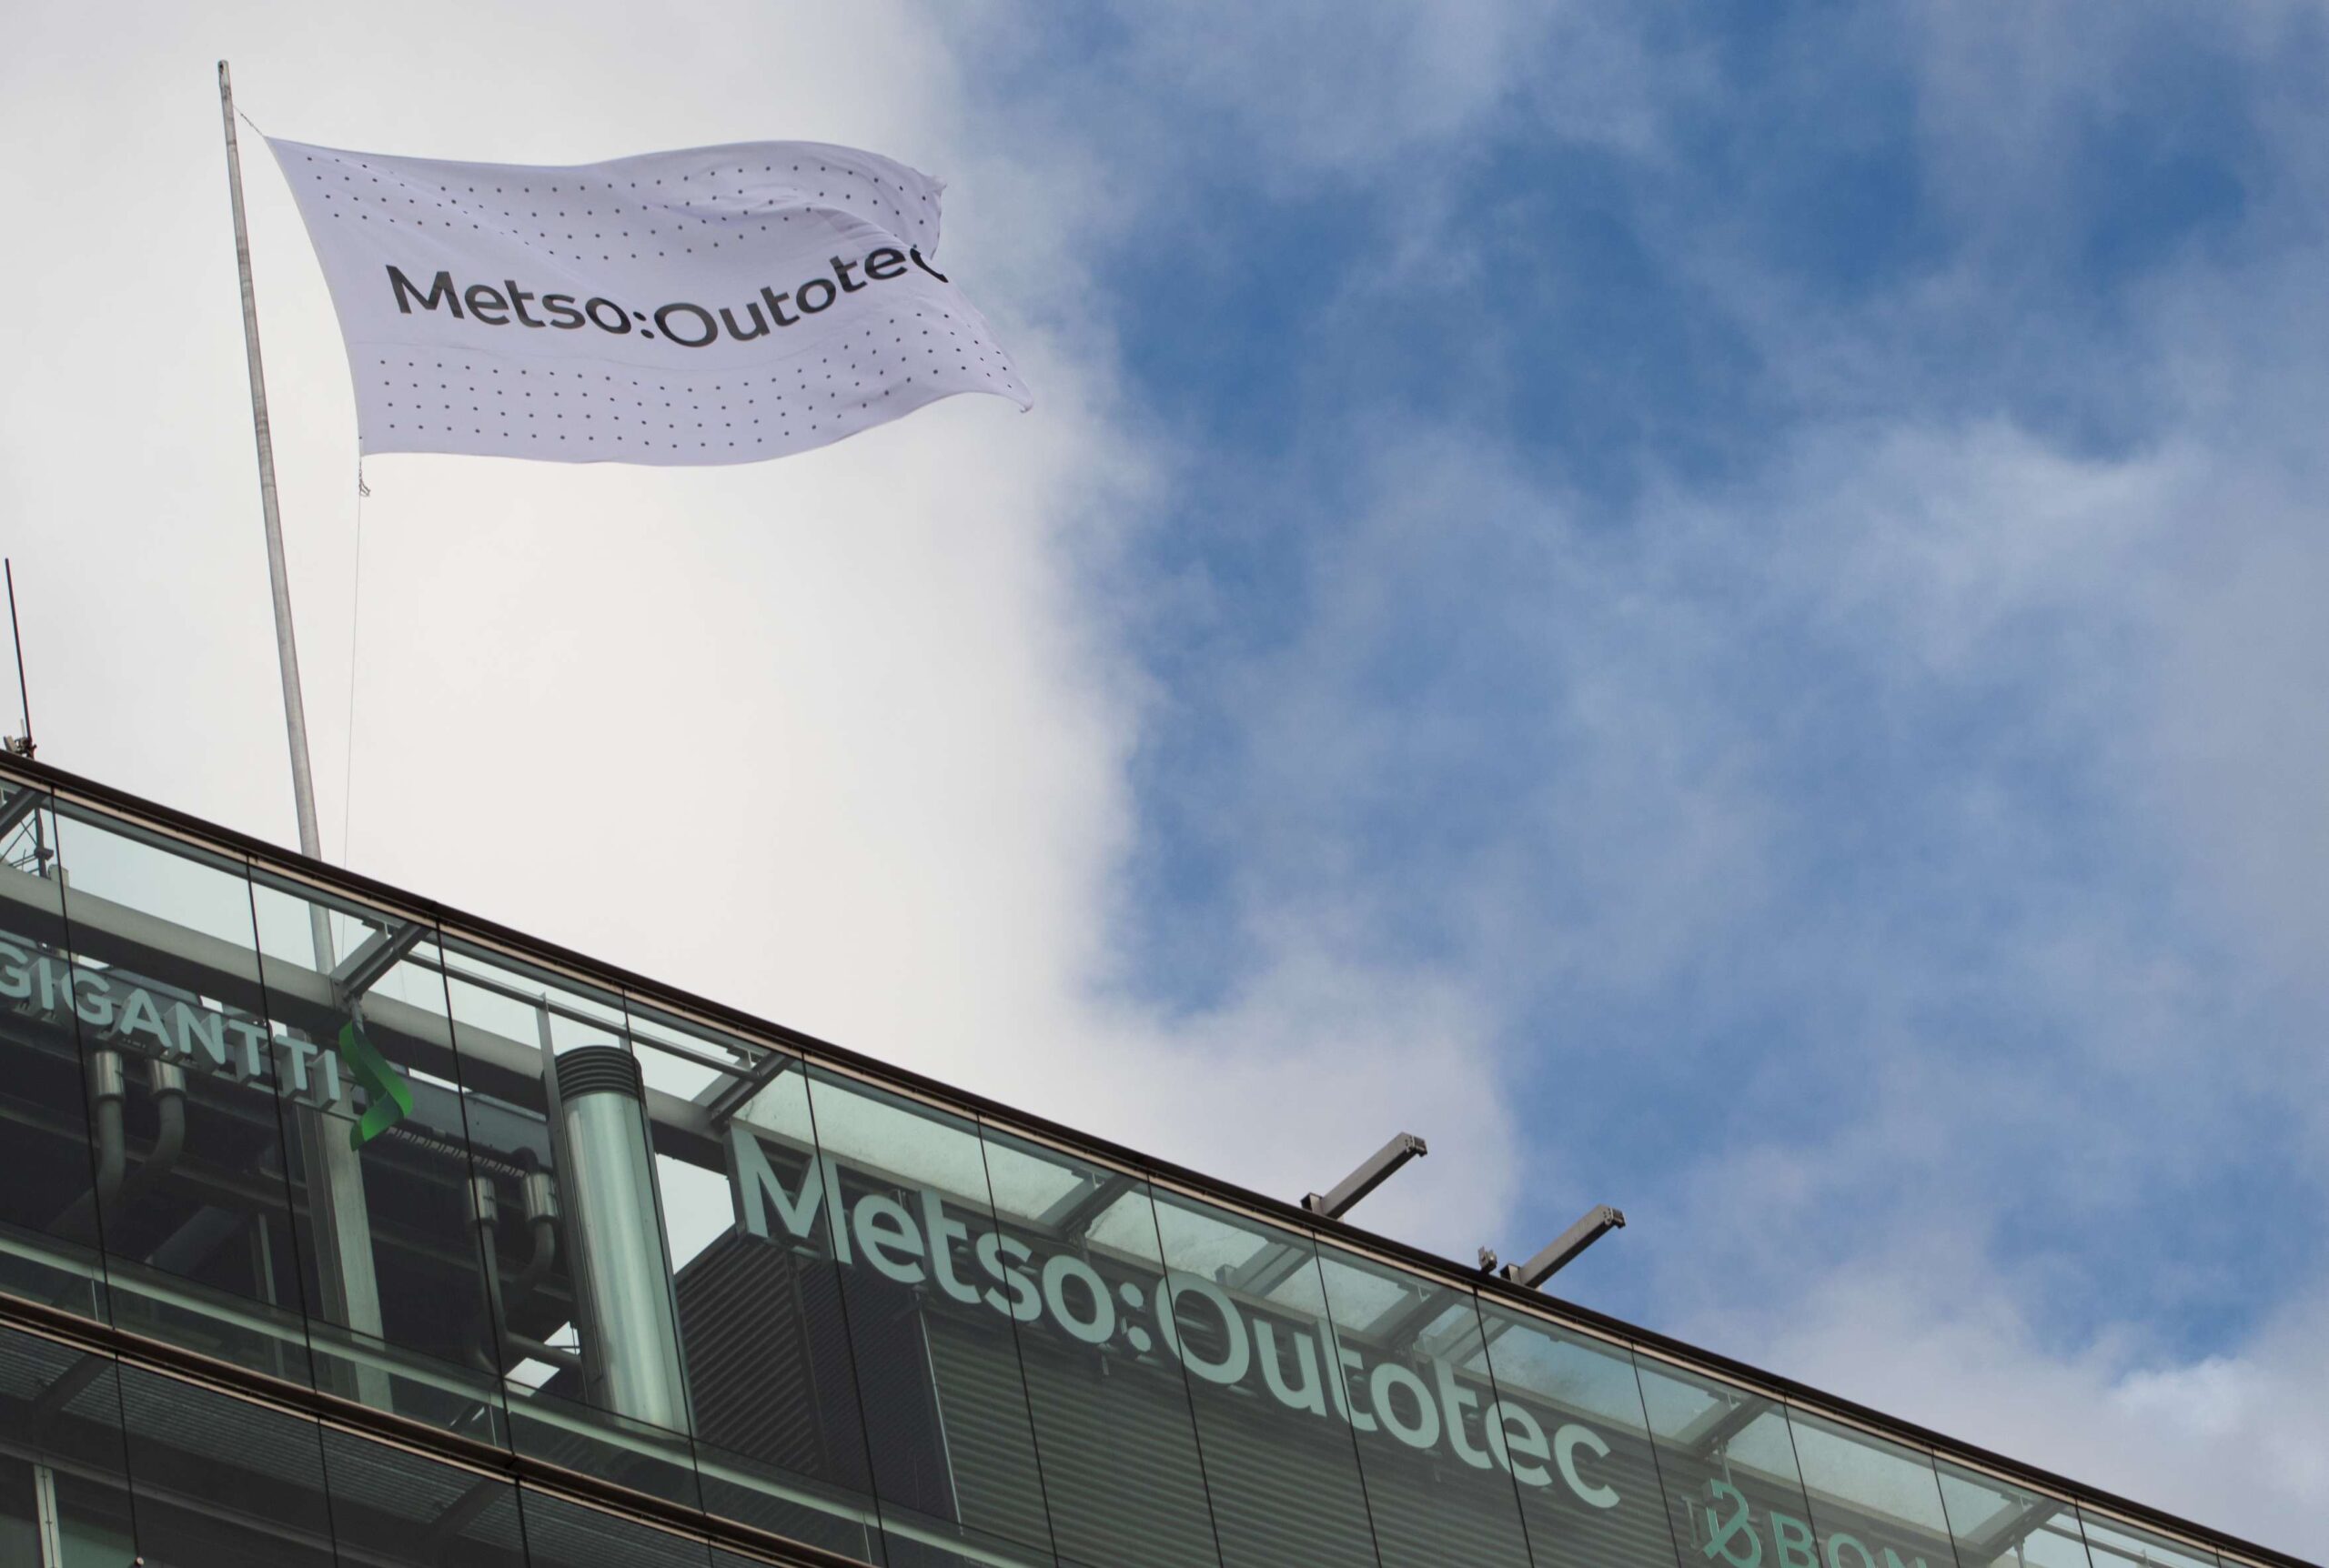 During spring 2022, Metso Outotec has made a one-time investment of €2,2-million to correct the identified individual, unexplained gender-related pay gaps.